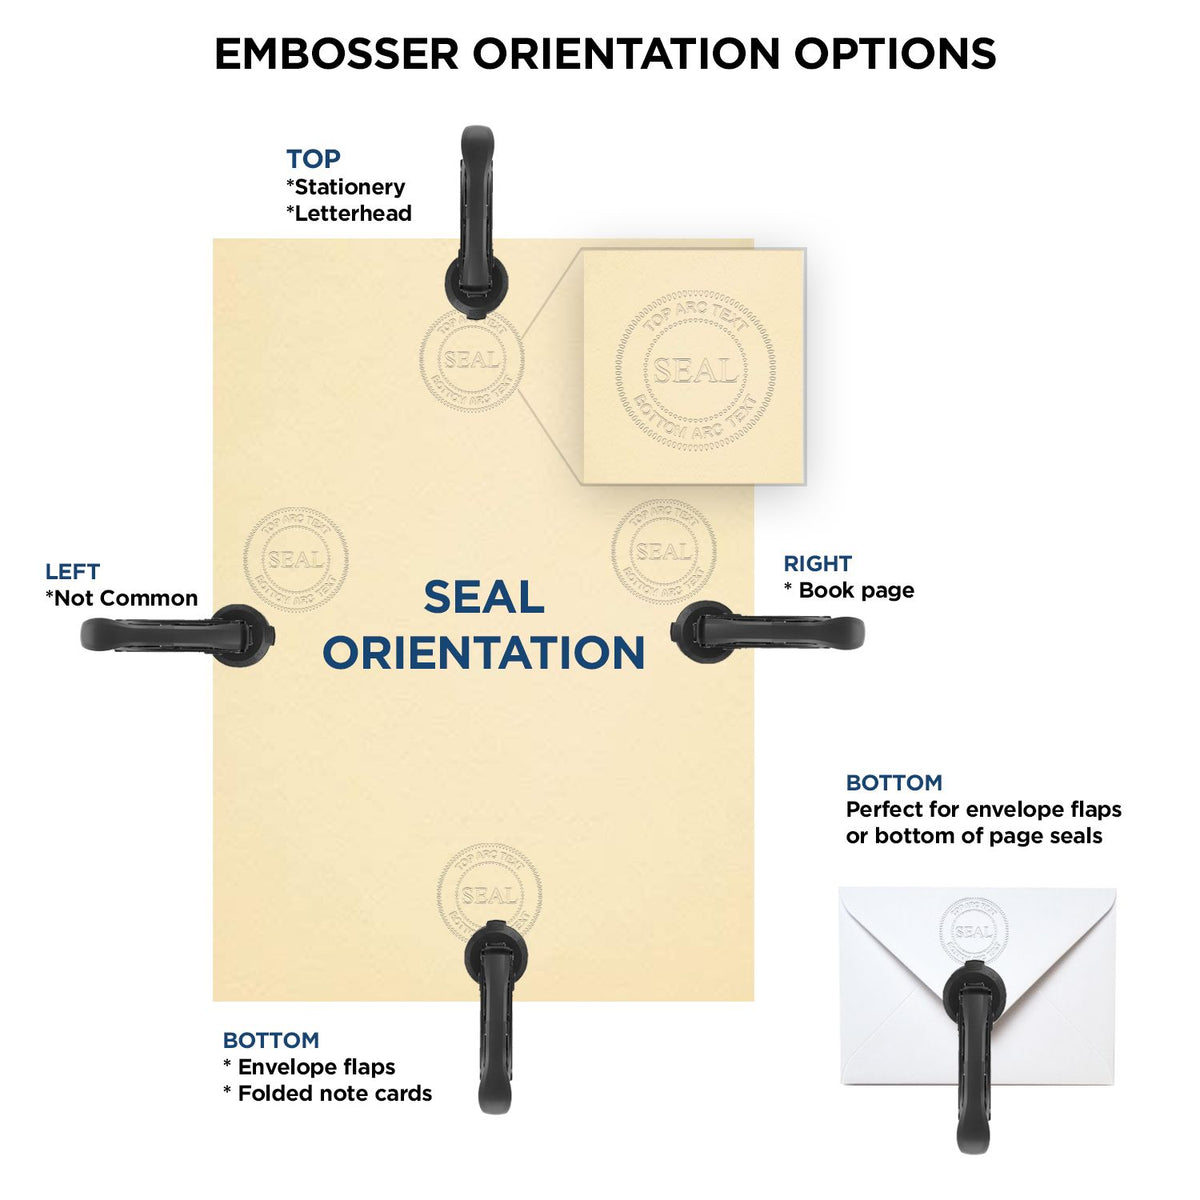 An infographic for the Hybrid Indiana Land Surveyor Seal showing embosser orientation, this is showing examples of a top, bottom, right and left insert.